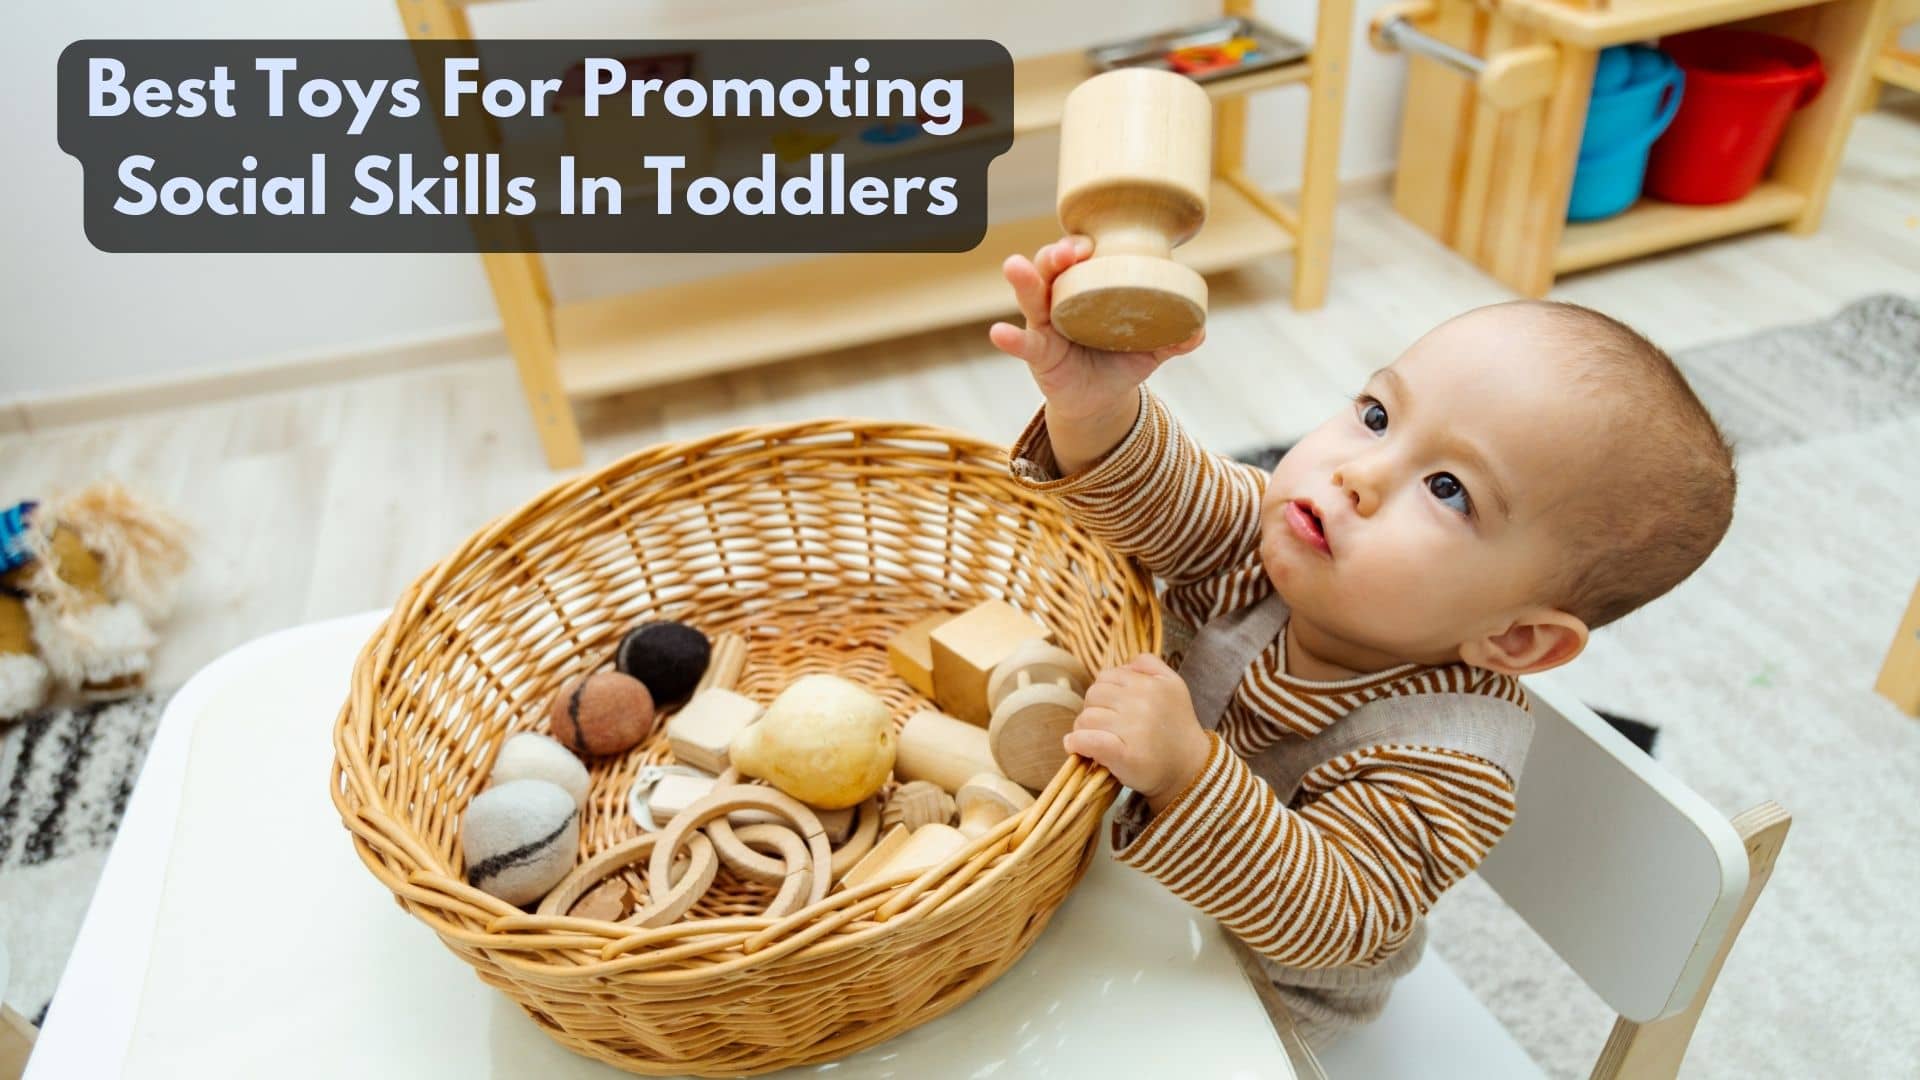 What Are The Best Toys For Promoting Toddler’s Social Skills?